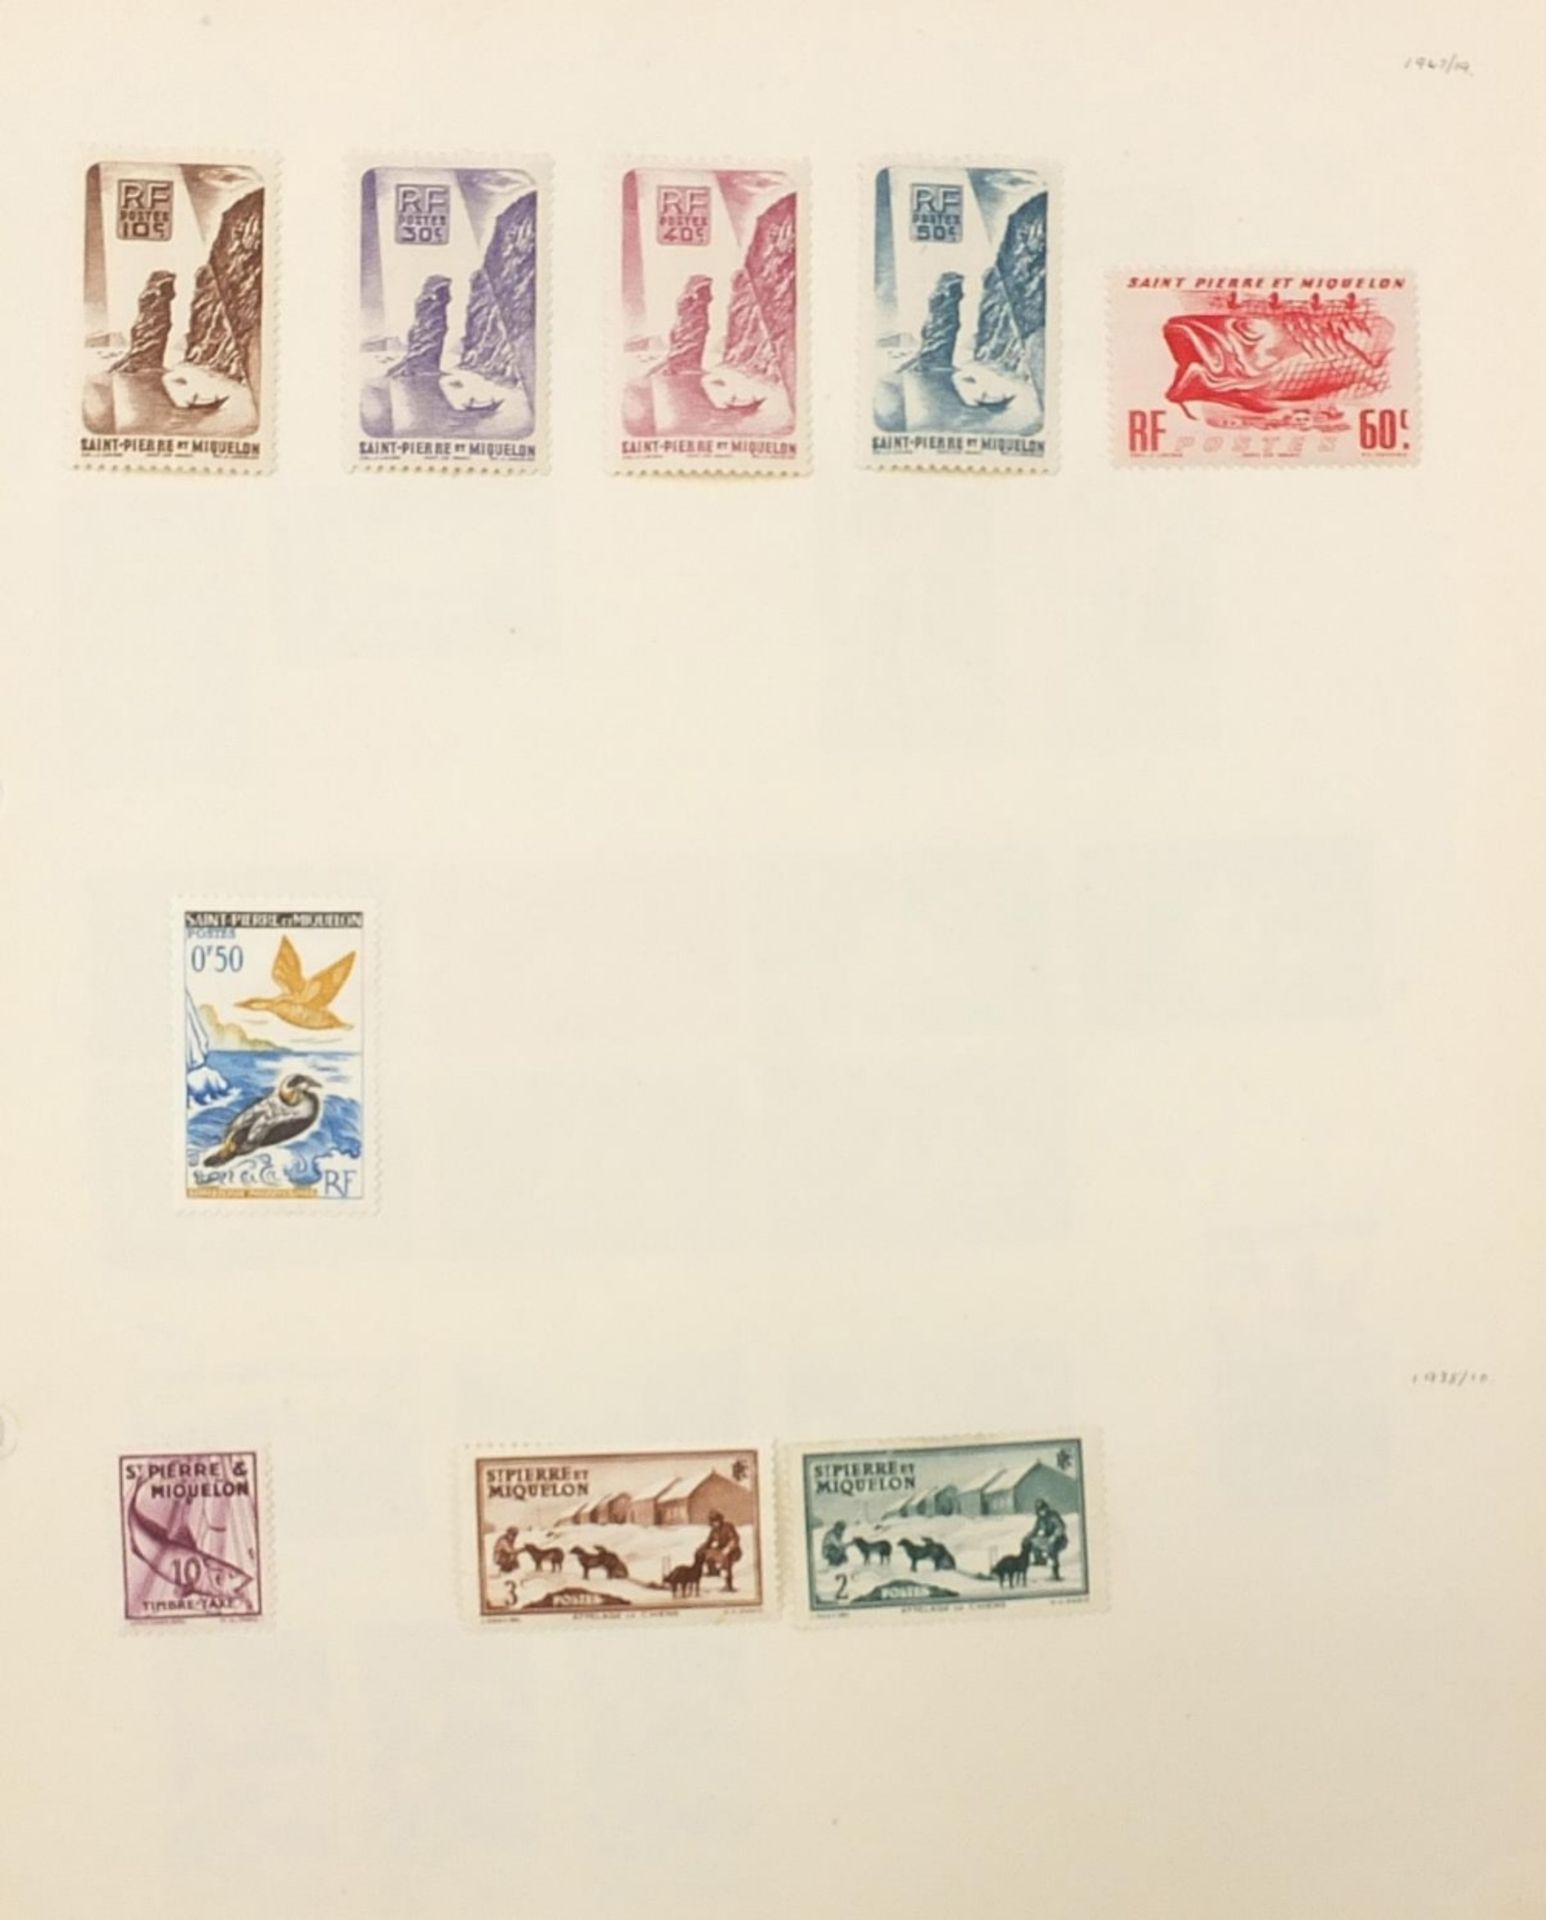 Extensive collection of antique and later world stamps arranged in albums including Brazil, - Image 34 of 52